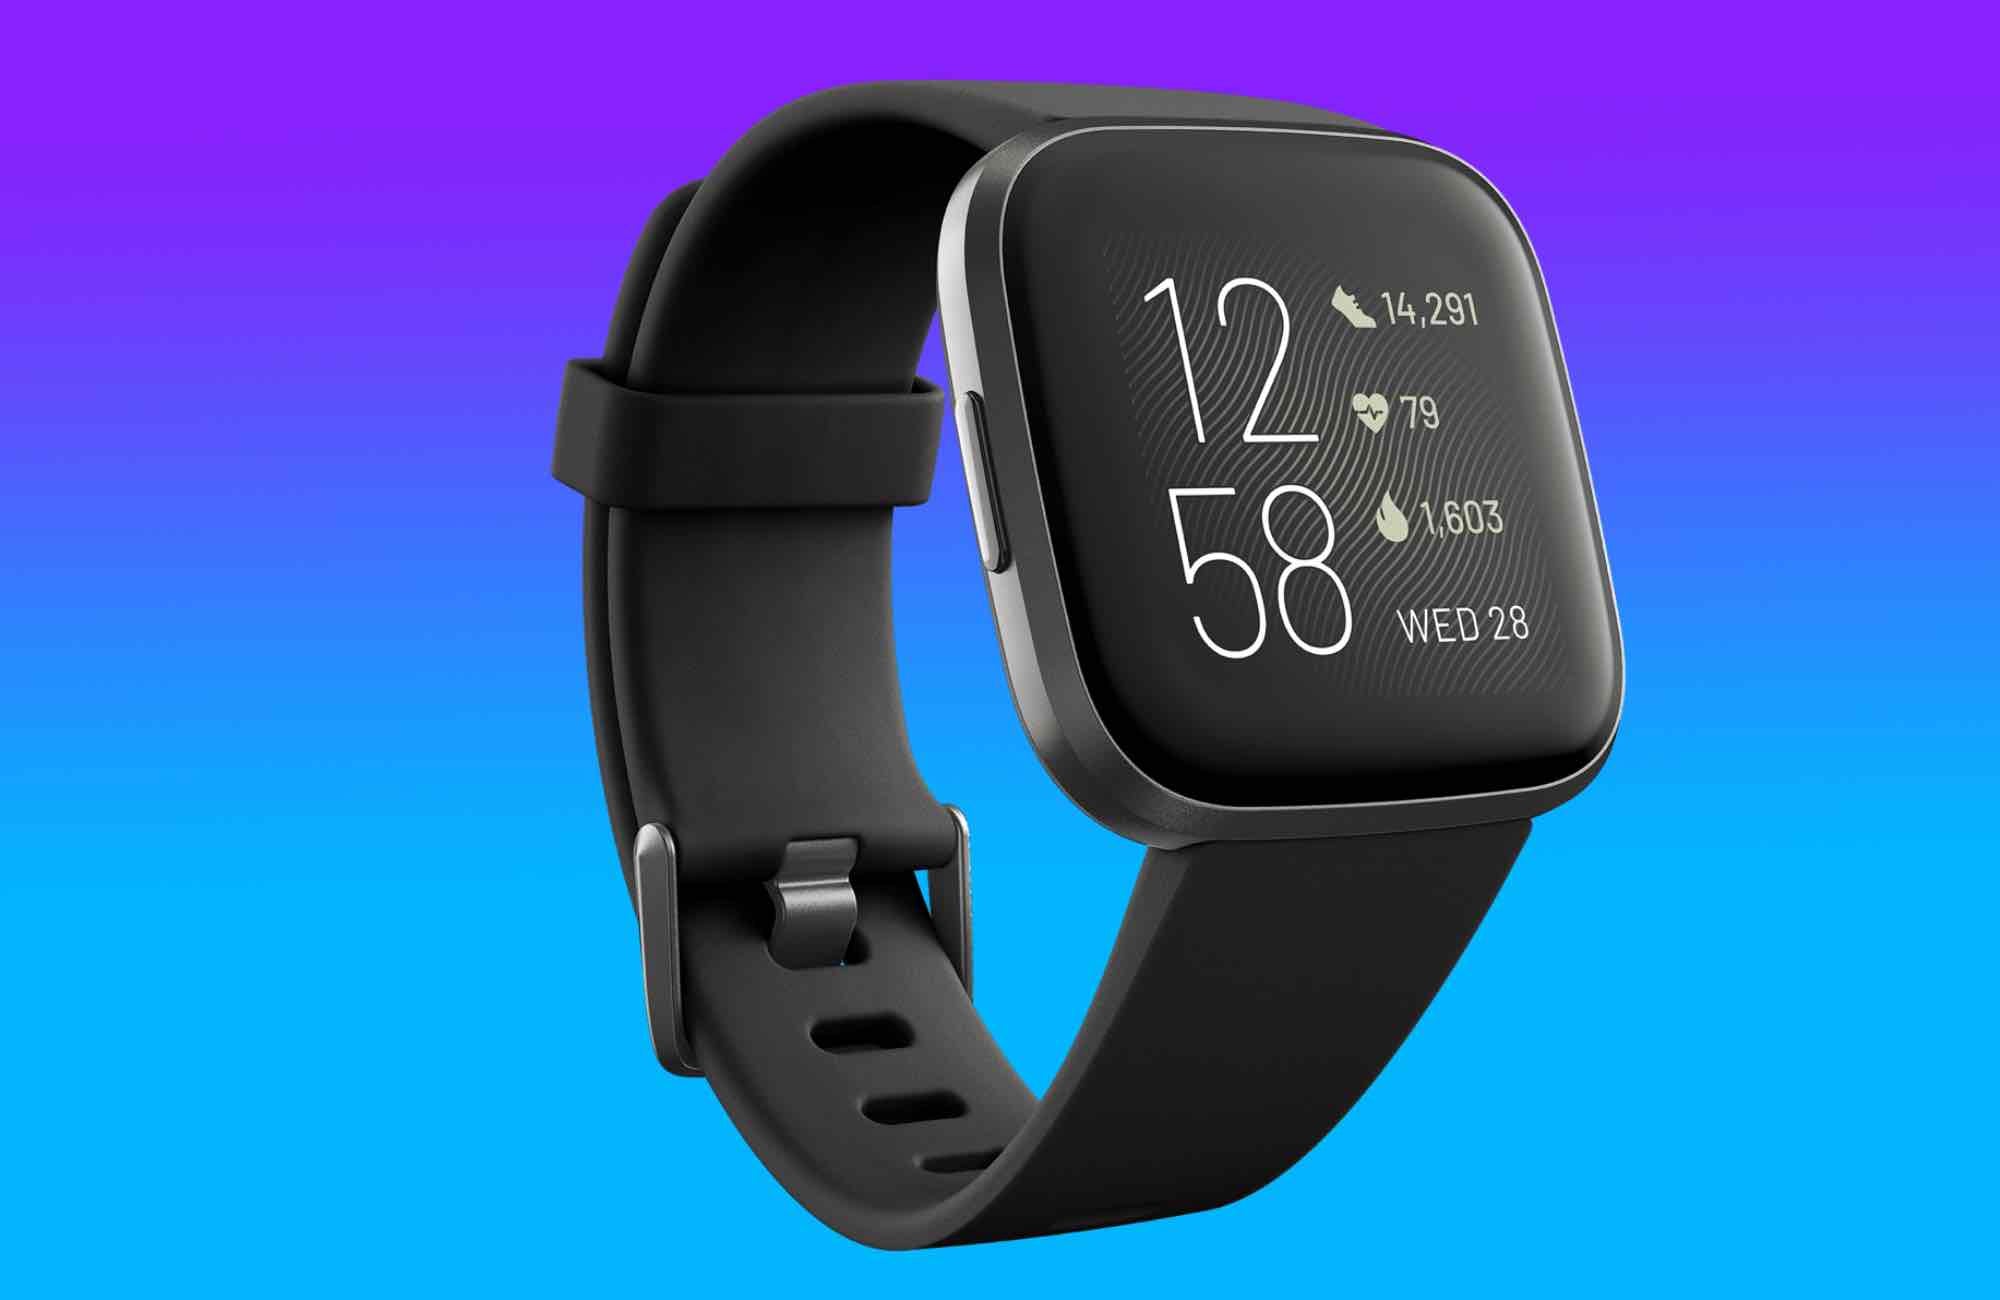 Get the Fitbit Versa 2 for its lowest price ever on Amazon